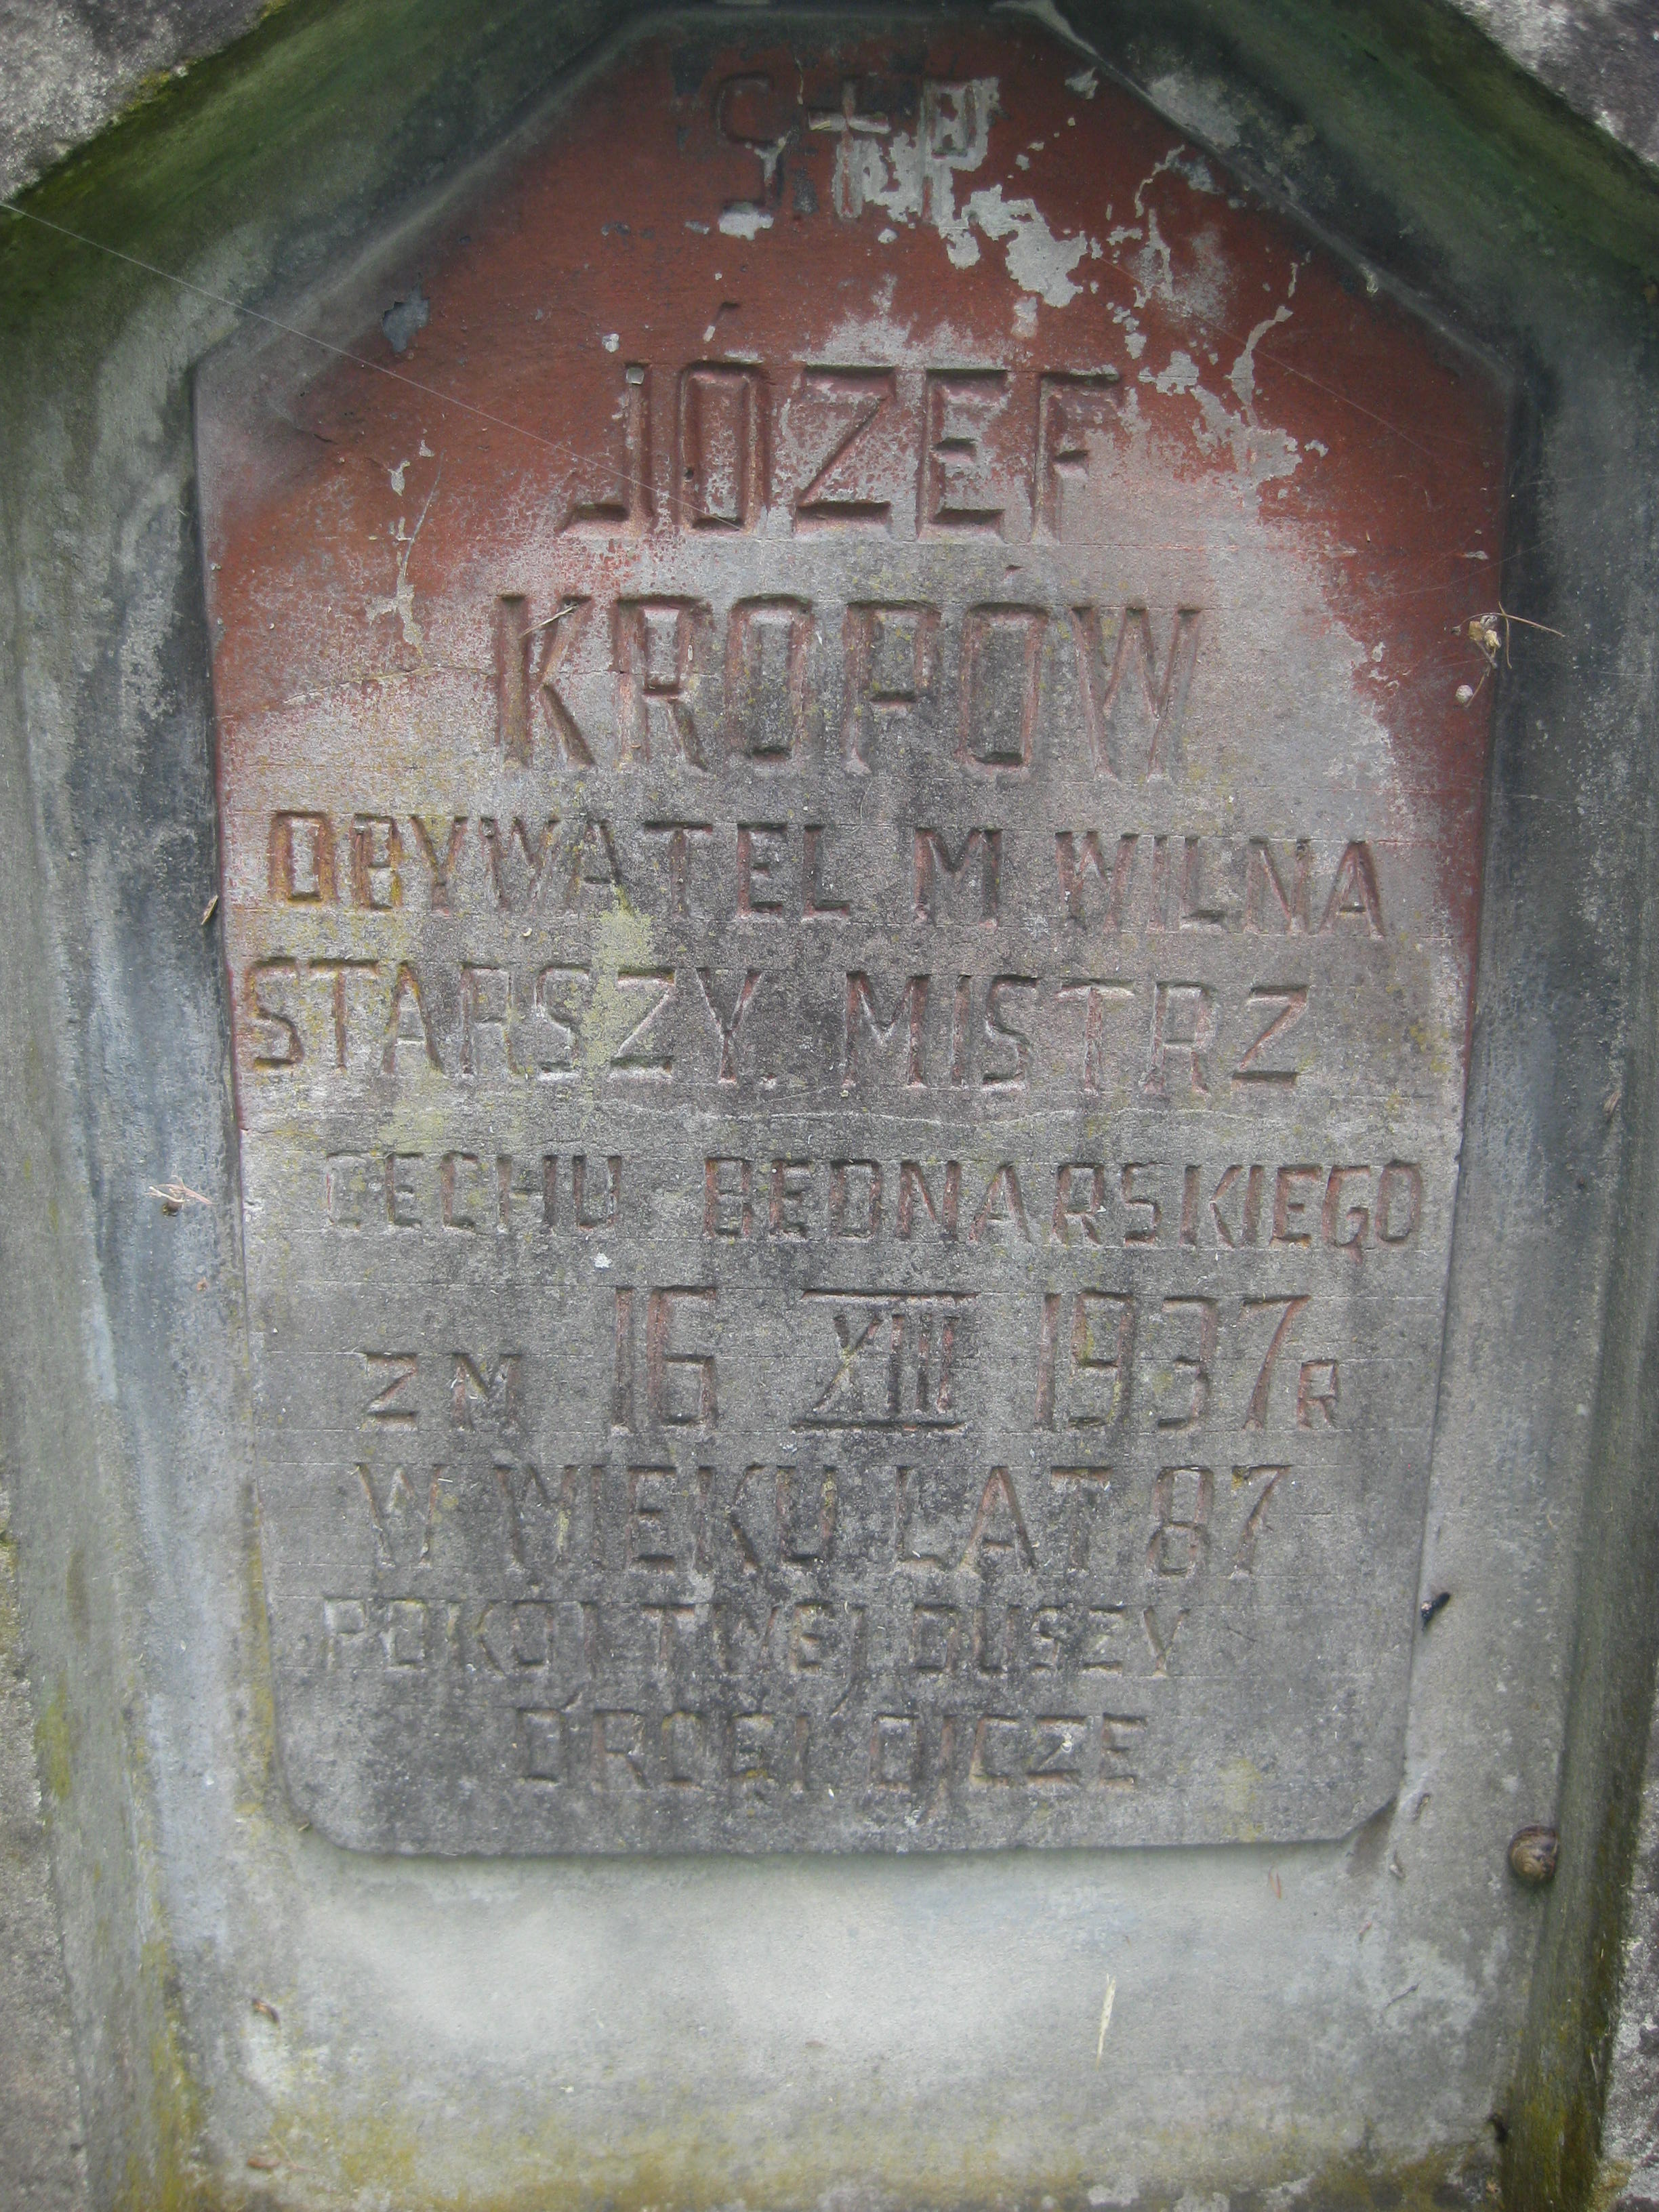 Fragment of the gravestone of Jozef Krops, Na Rossa cemetery in Vilnius, as of 2013.